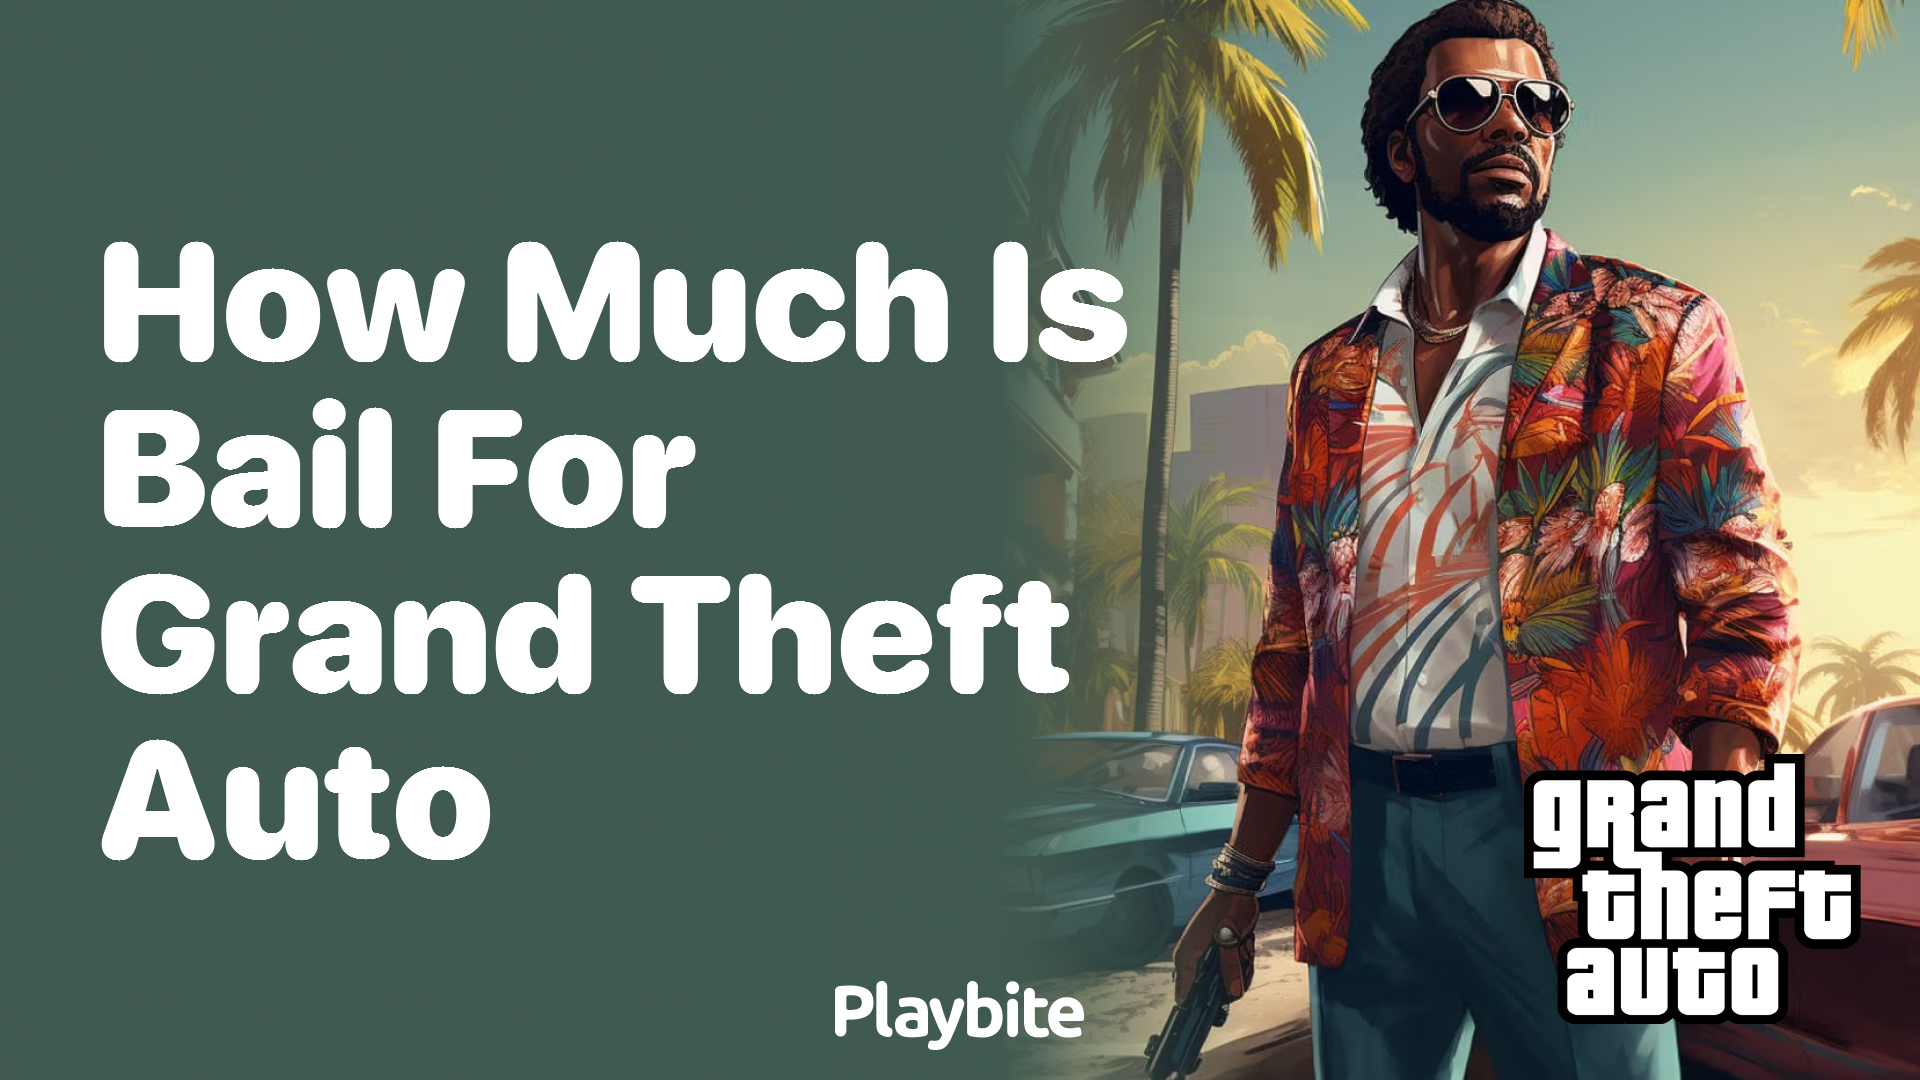 How much is bail for Grand Theft Auto?